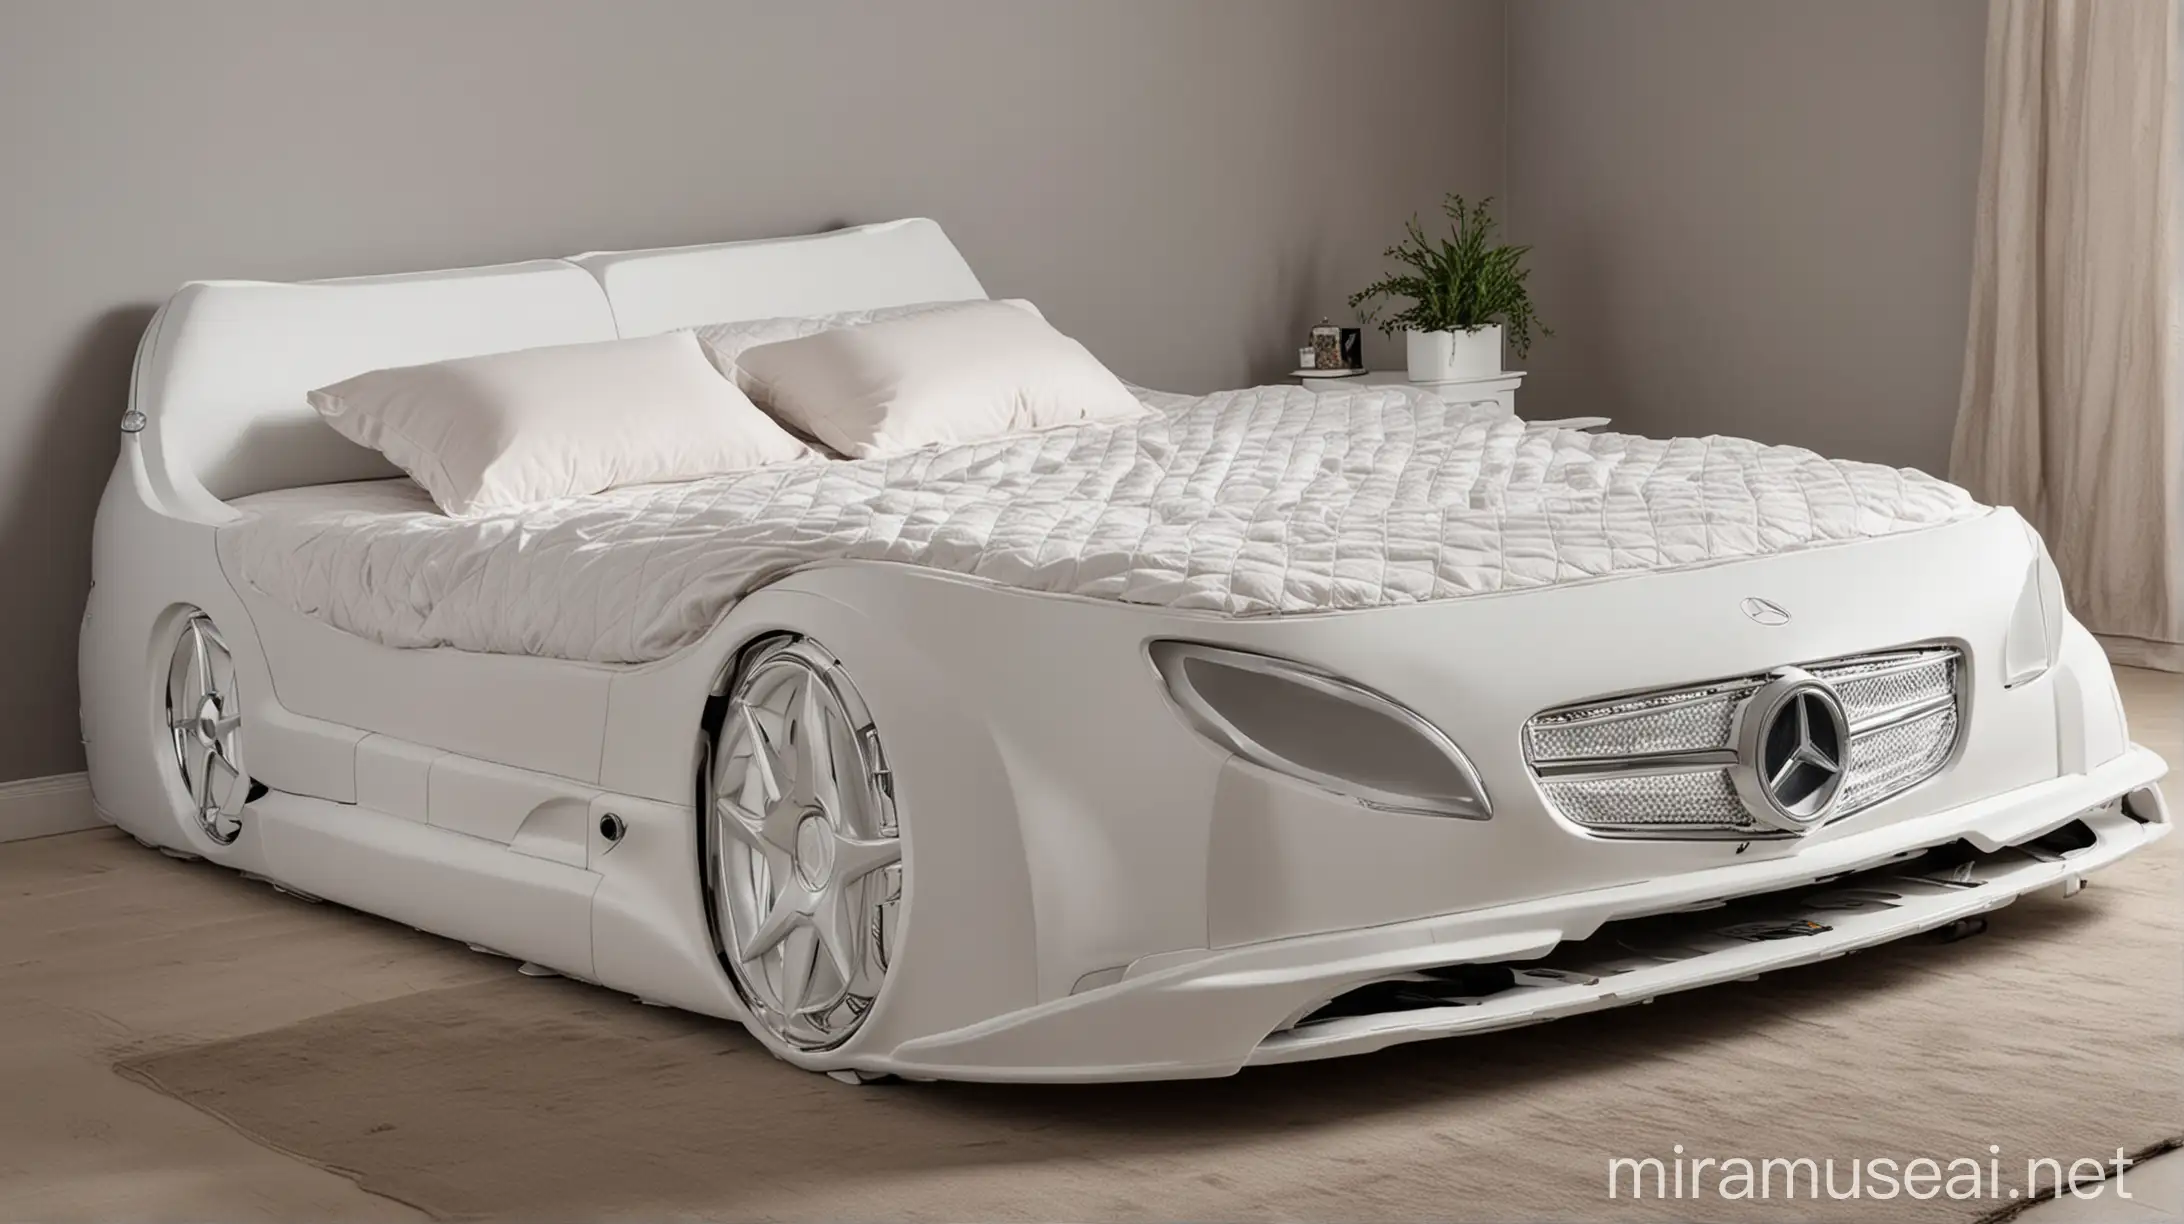 Double bed in the shape of a Mercedes car. 